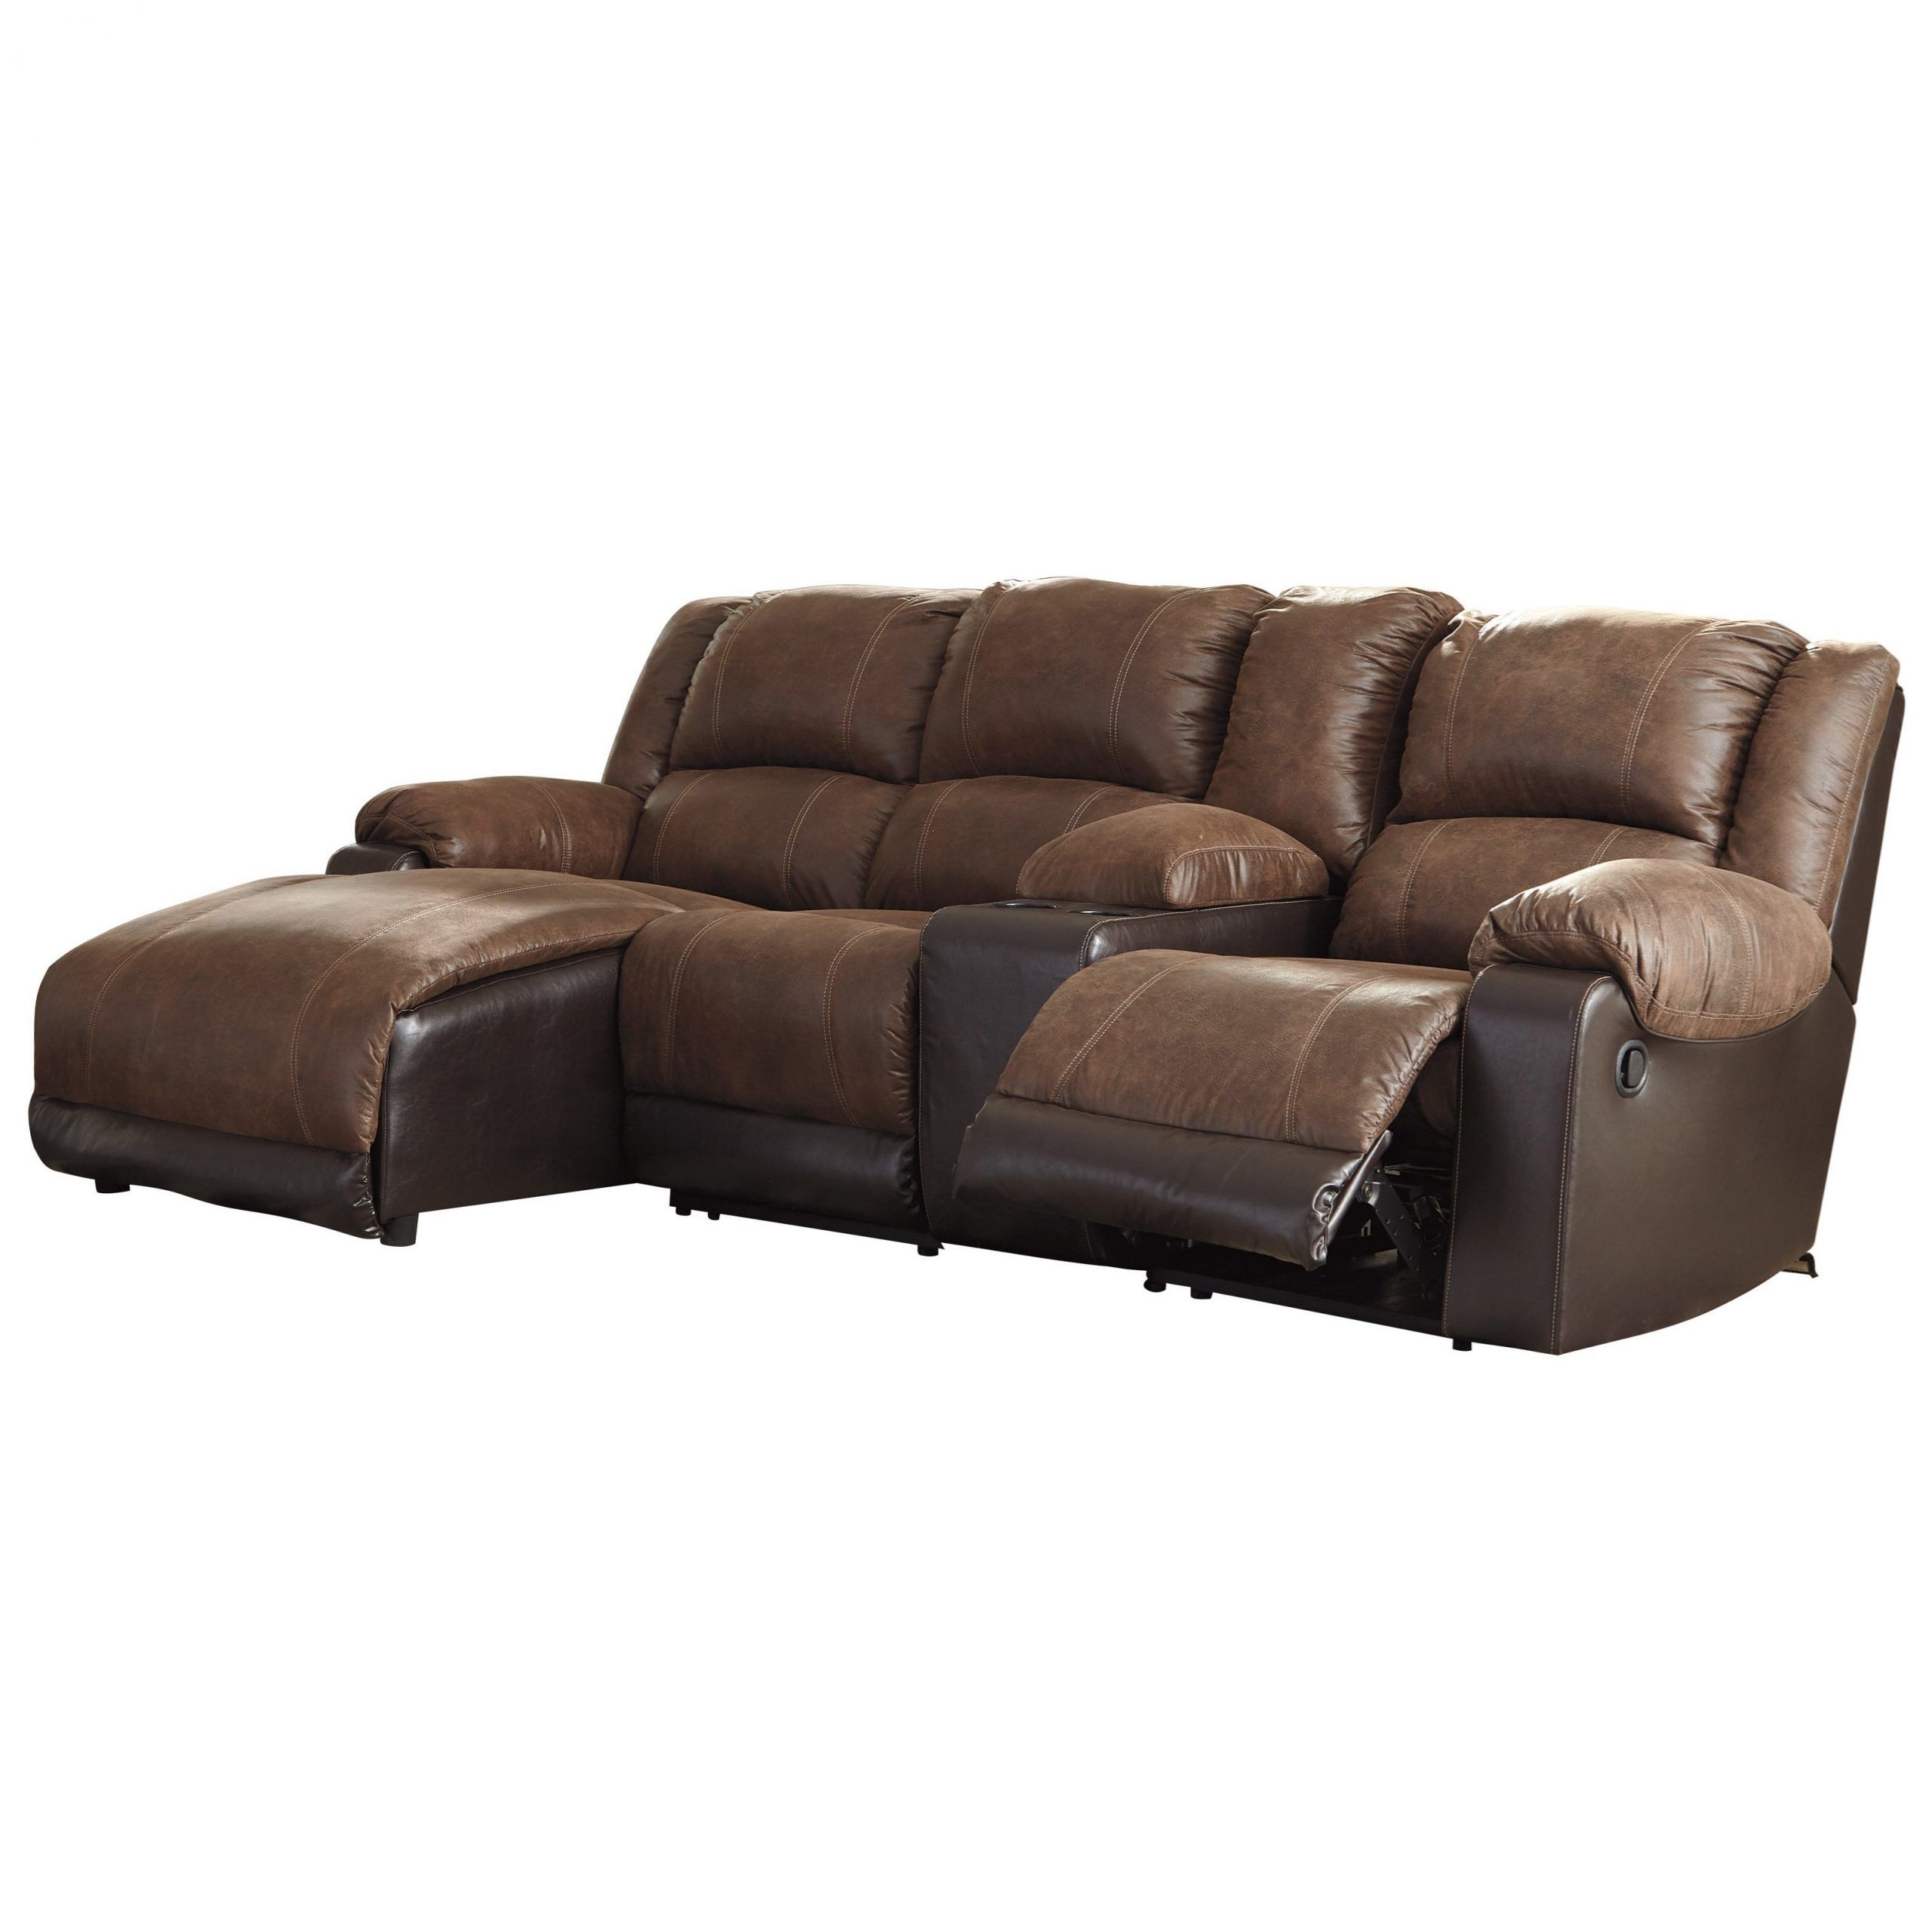 Signature Designashley Nantahala Reclining Chaise Sofa Pertaining To Celine Sectional Futon Sofas With Storage Reclining Couch (View 4 of 15)